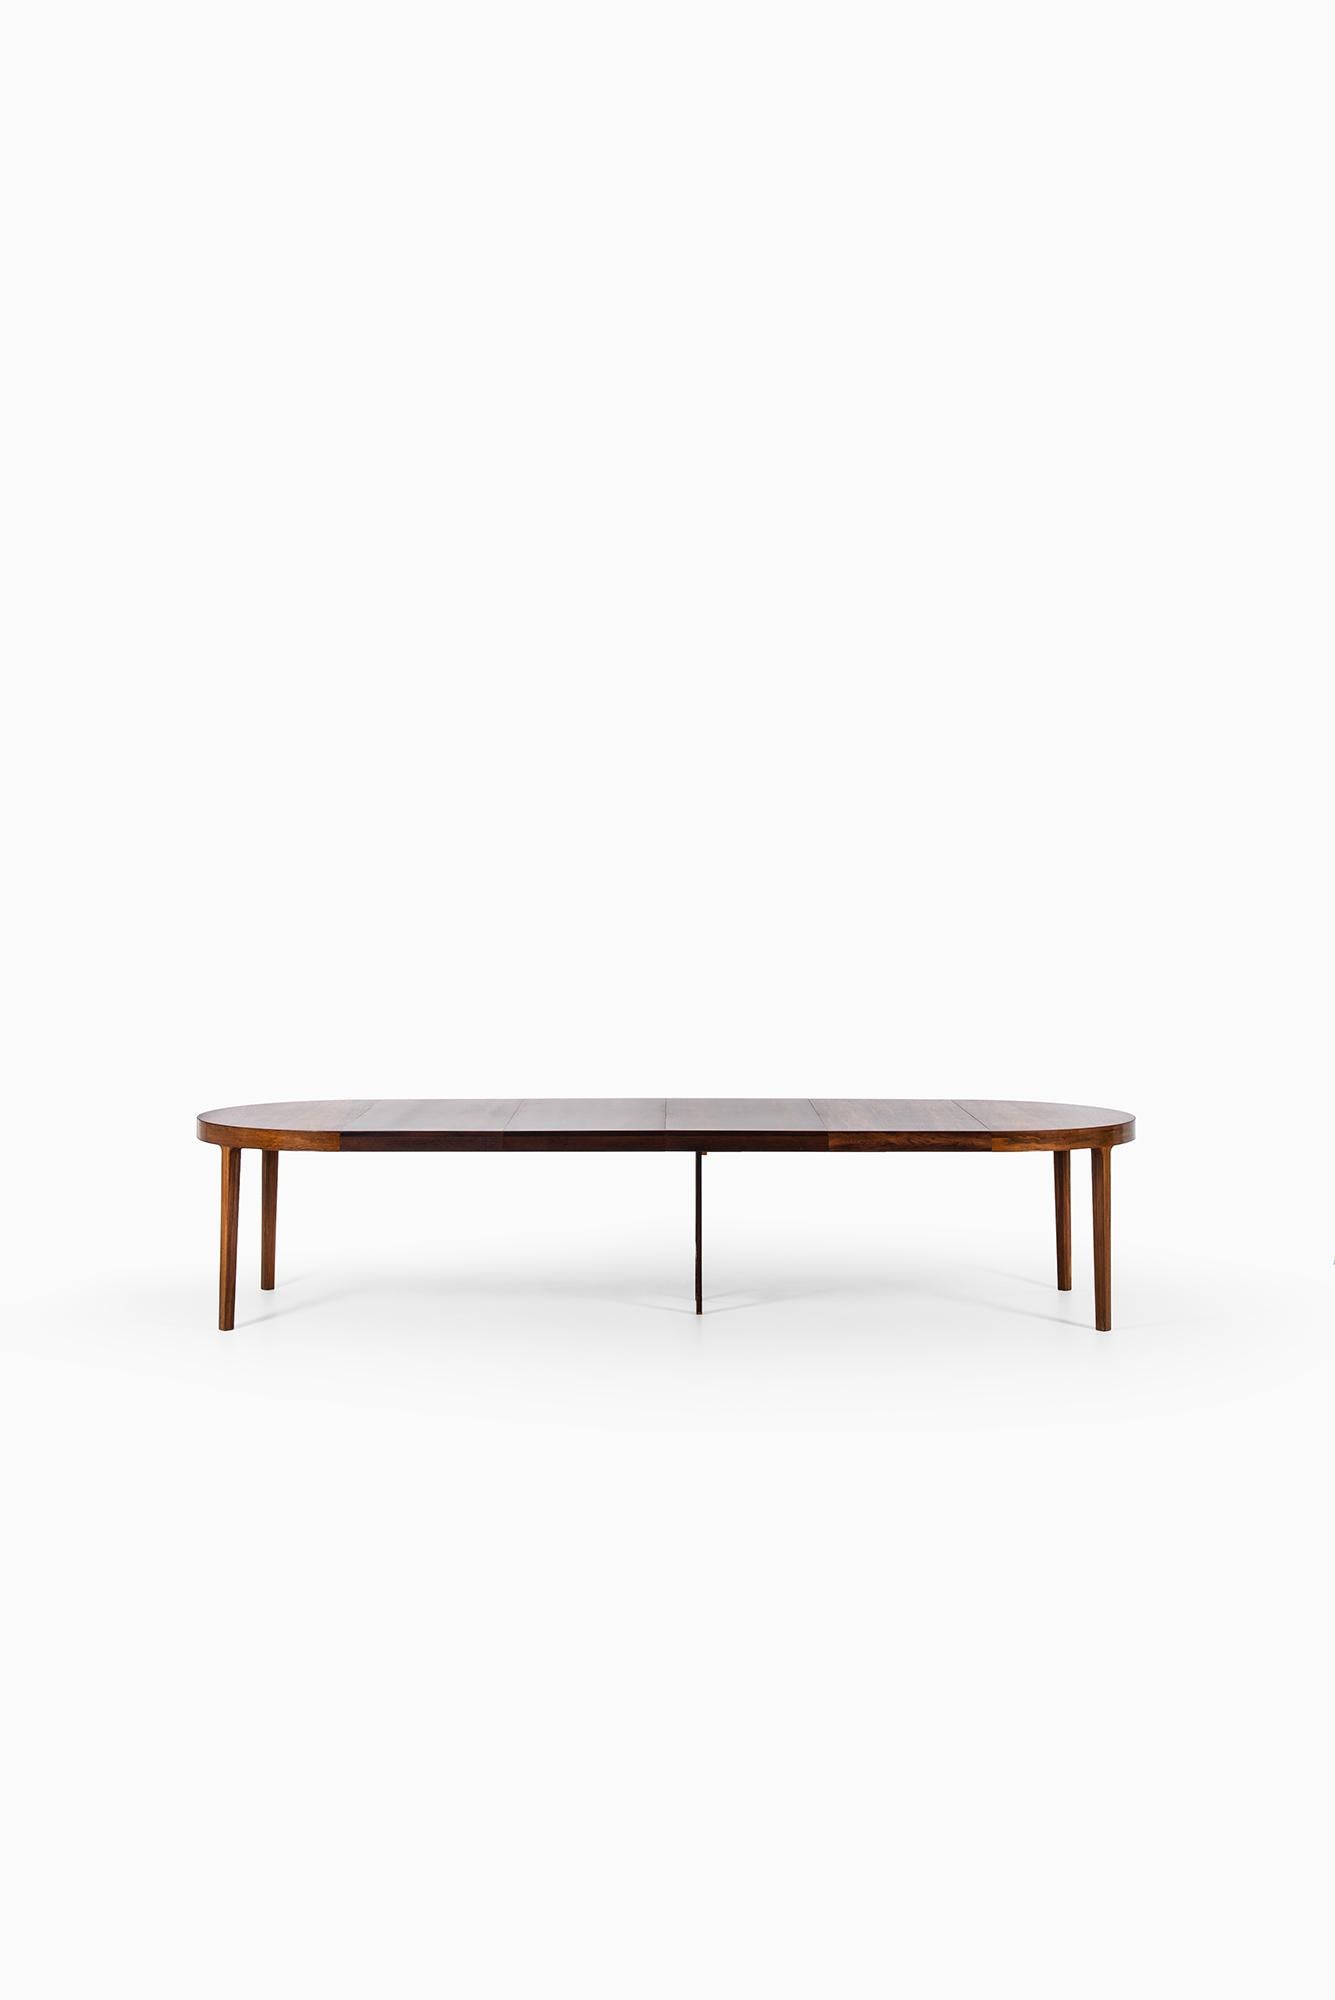 Ole Wanscher Large Dining Table by Cabinetmaker A.J. Iversen in Denmark 4